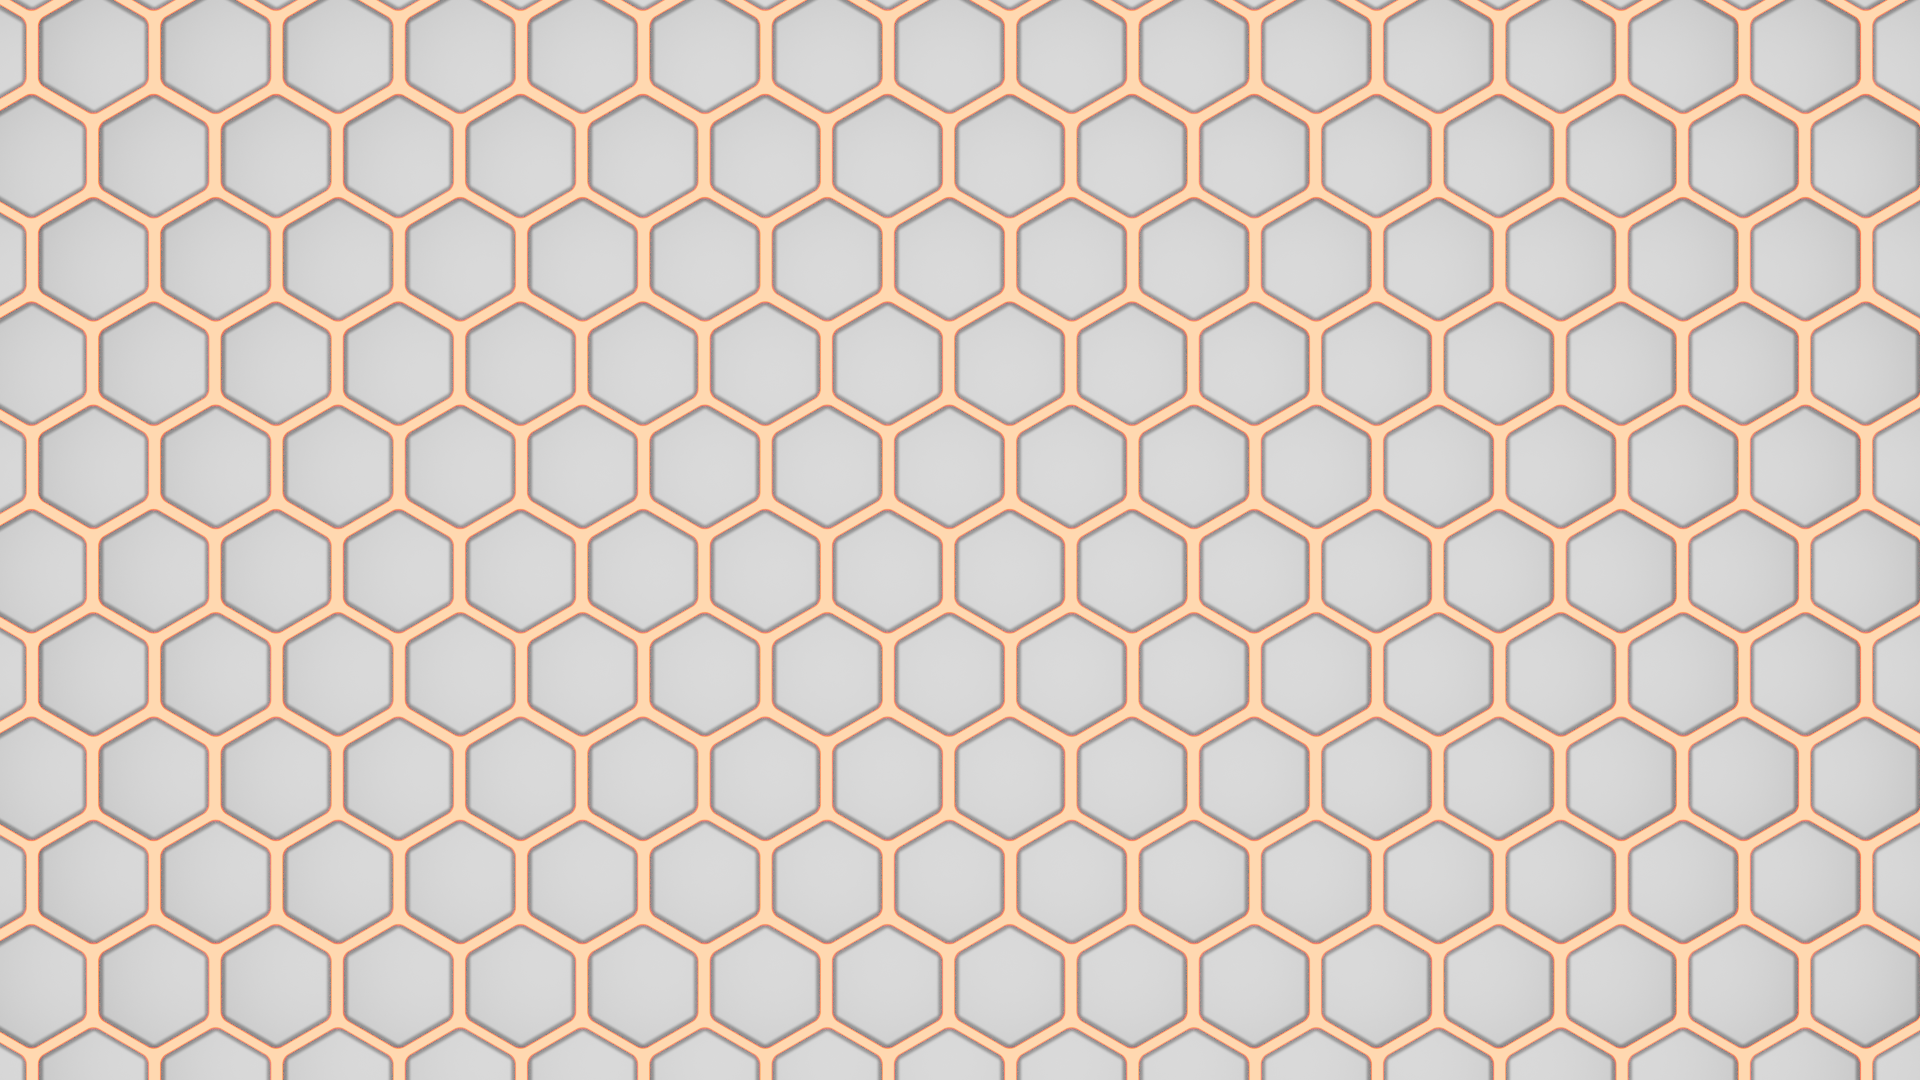 General 1920x1080 hexagon abstract grid texture